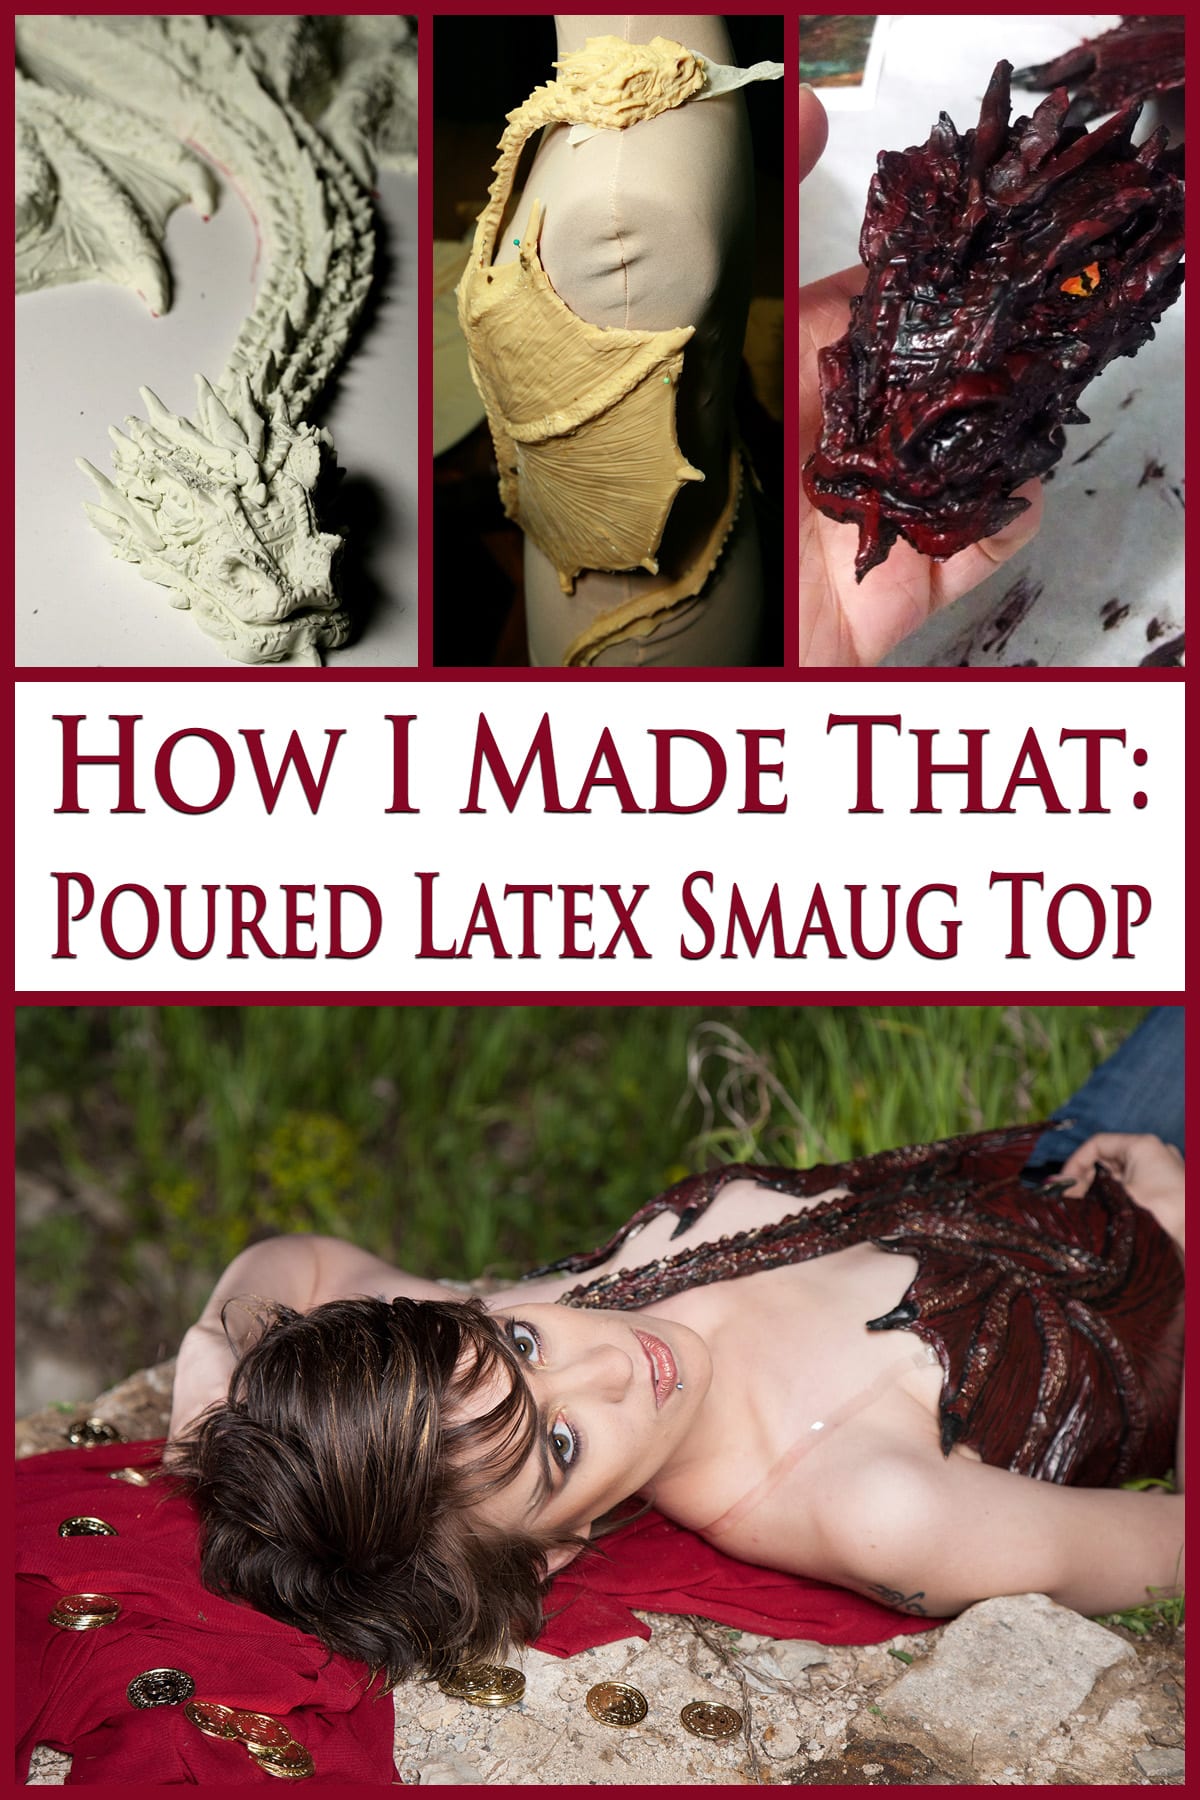 A beautiful young woman with short hair is laying on some rocks, wearing a dark burgundy latex, 3D sculpted dragon top. It wraps around her torso, and looks like Smaug. Above that are 3 photos of the top being made, along with text that says: How I made that: Poured Latex Smaug Top